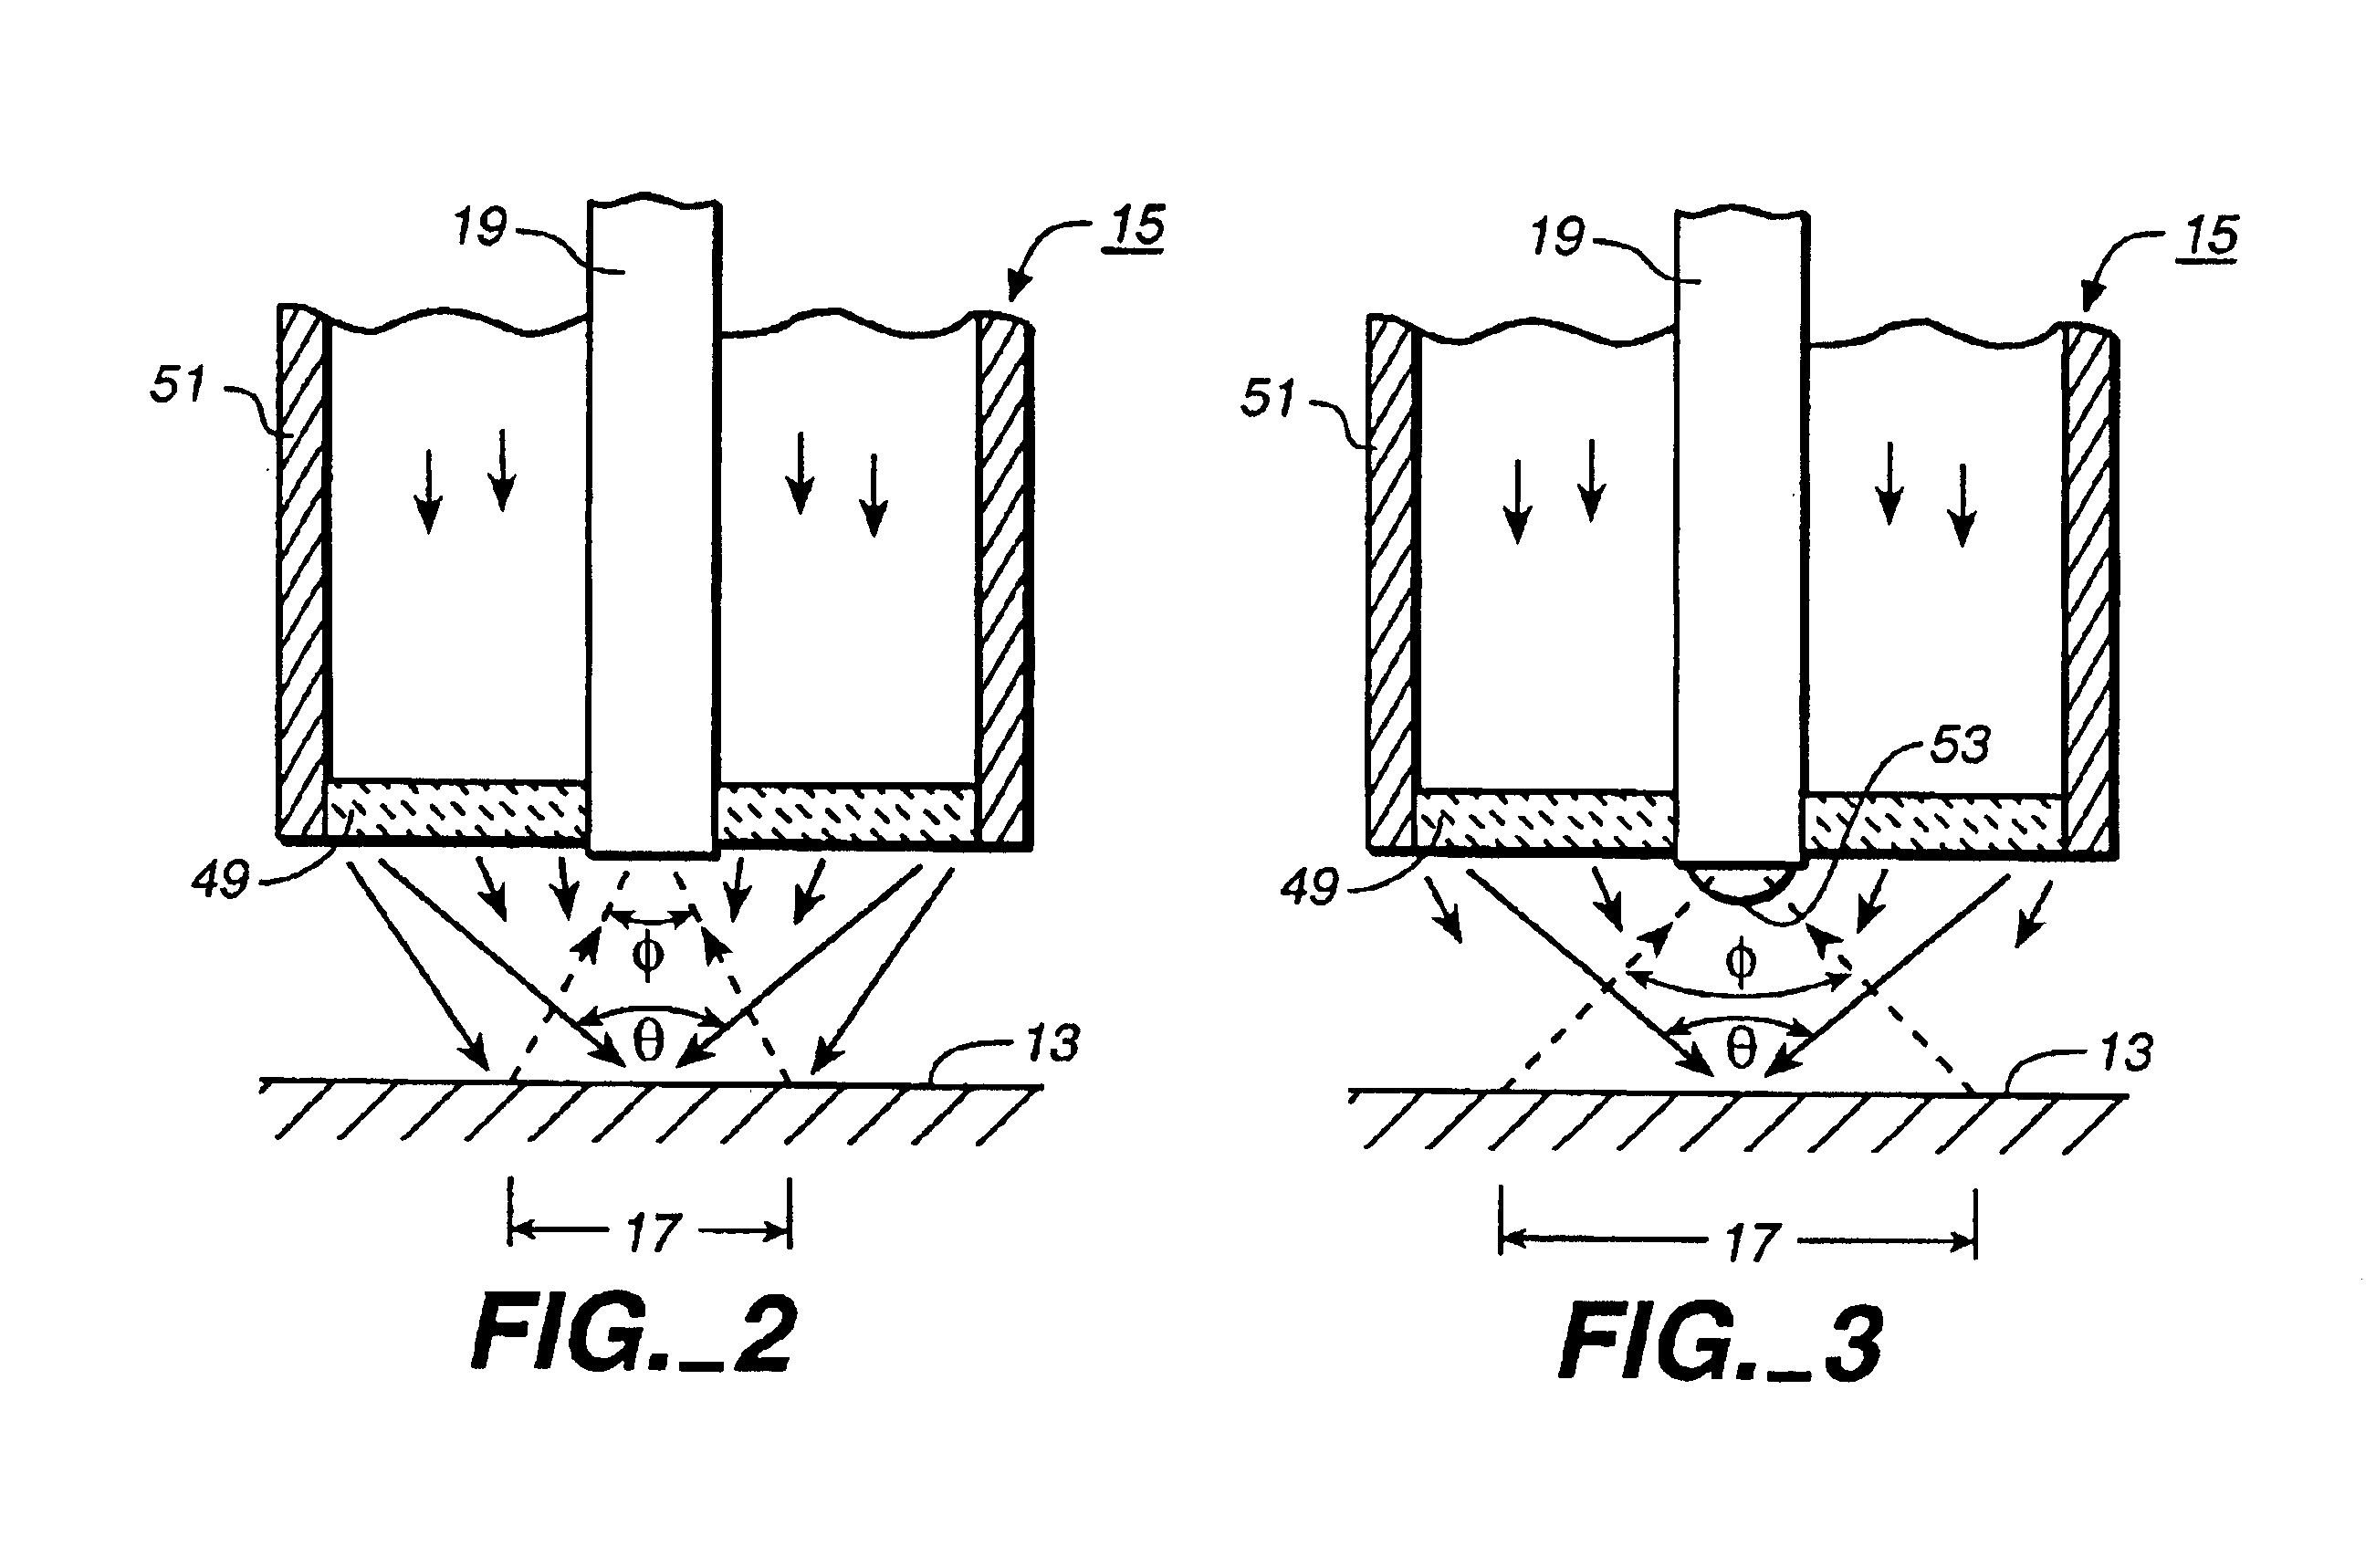 Optical techniques for measuring layer thicknesses and other surface characteristics of objects such as semiconductor wafers